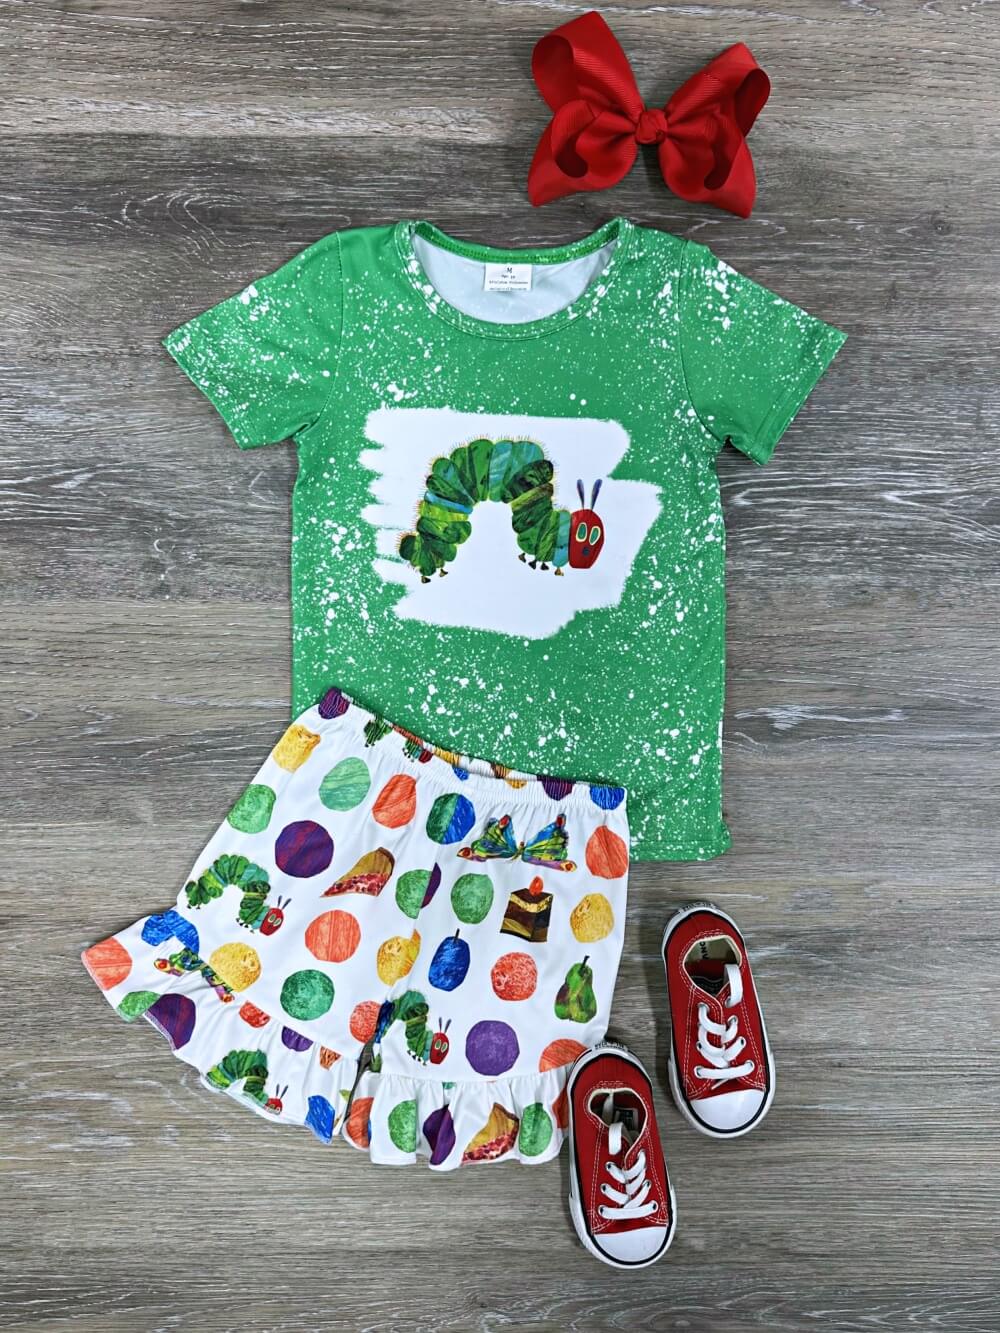 Hungry Caterpillar Green Ruffle Shorts Outfit - Sydney So Sweet